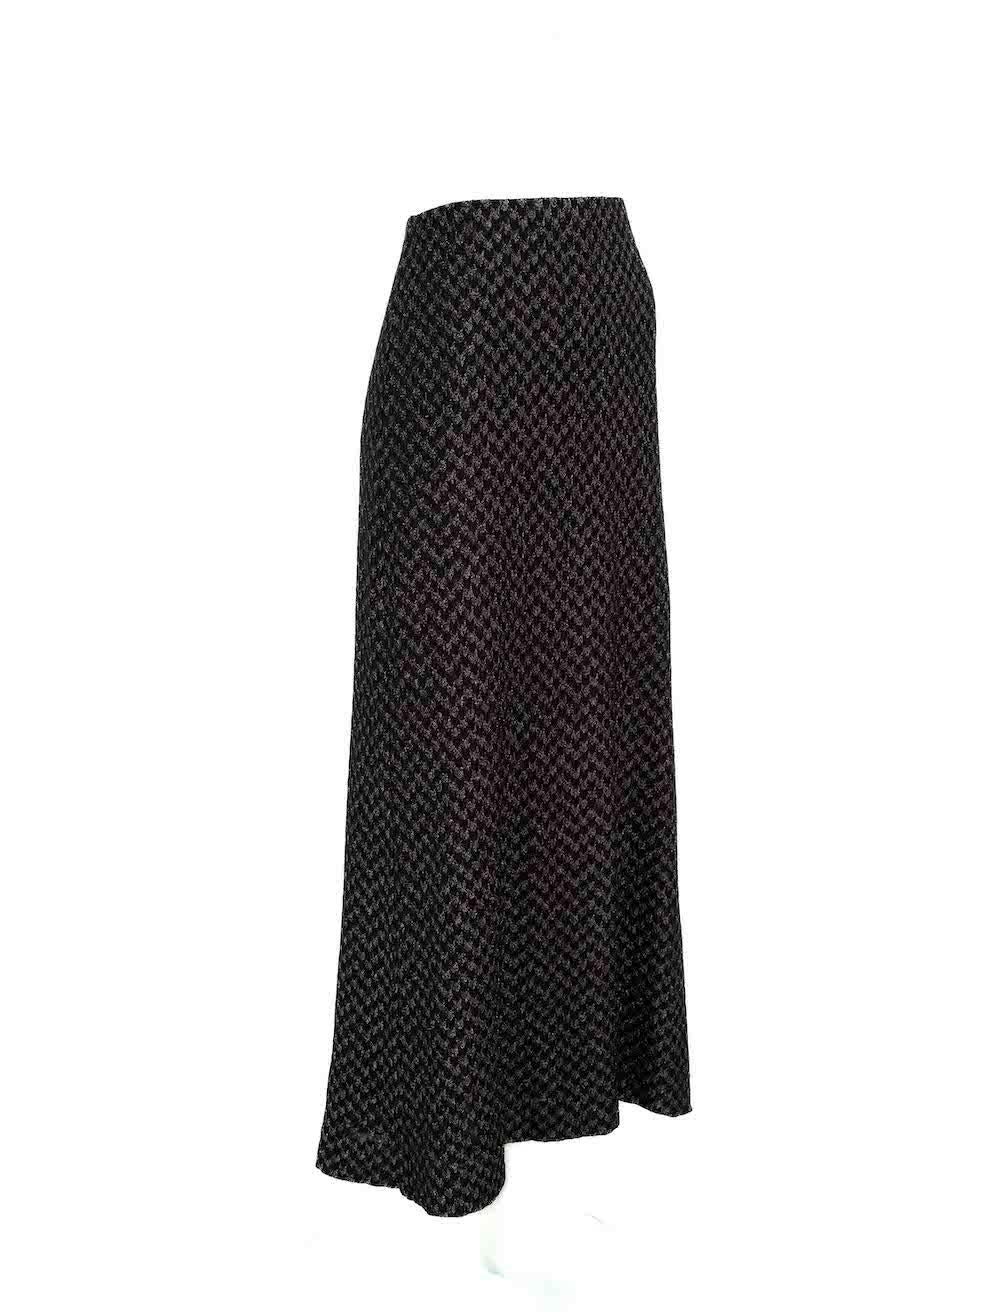 CONDITION is Very good. Minimal wear to skirt is evident. Minimal wear to lining layer where parts of the hem have come unstitched on this used Missoni designer resale item.
 
 Details
 Black
 Synthetic
 Skirt
 Metallic patterned
 Midi
 Elasticated